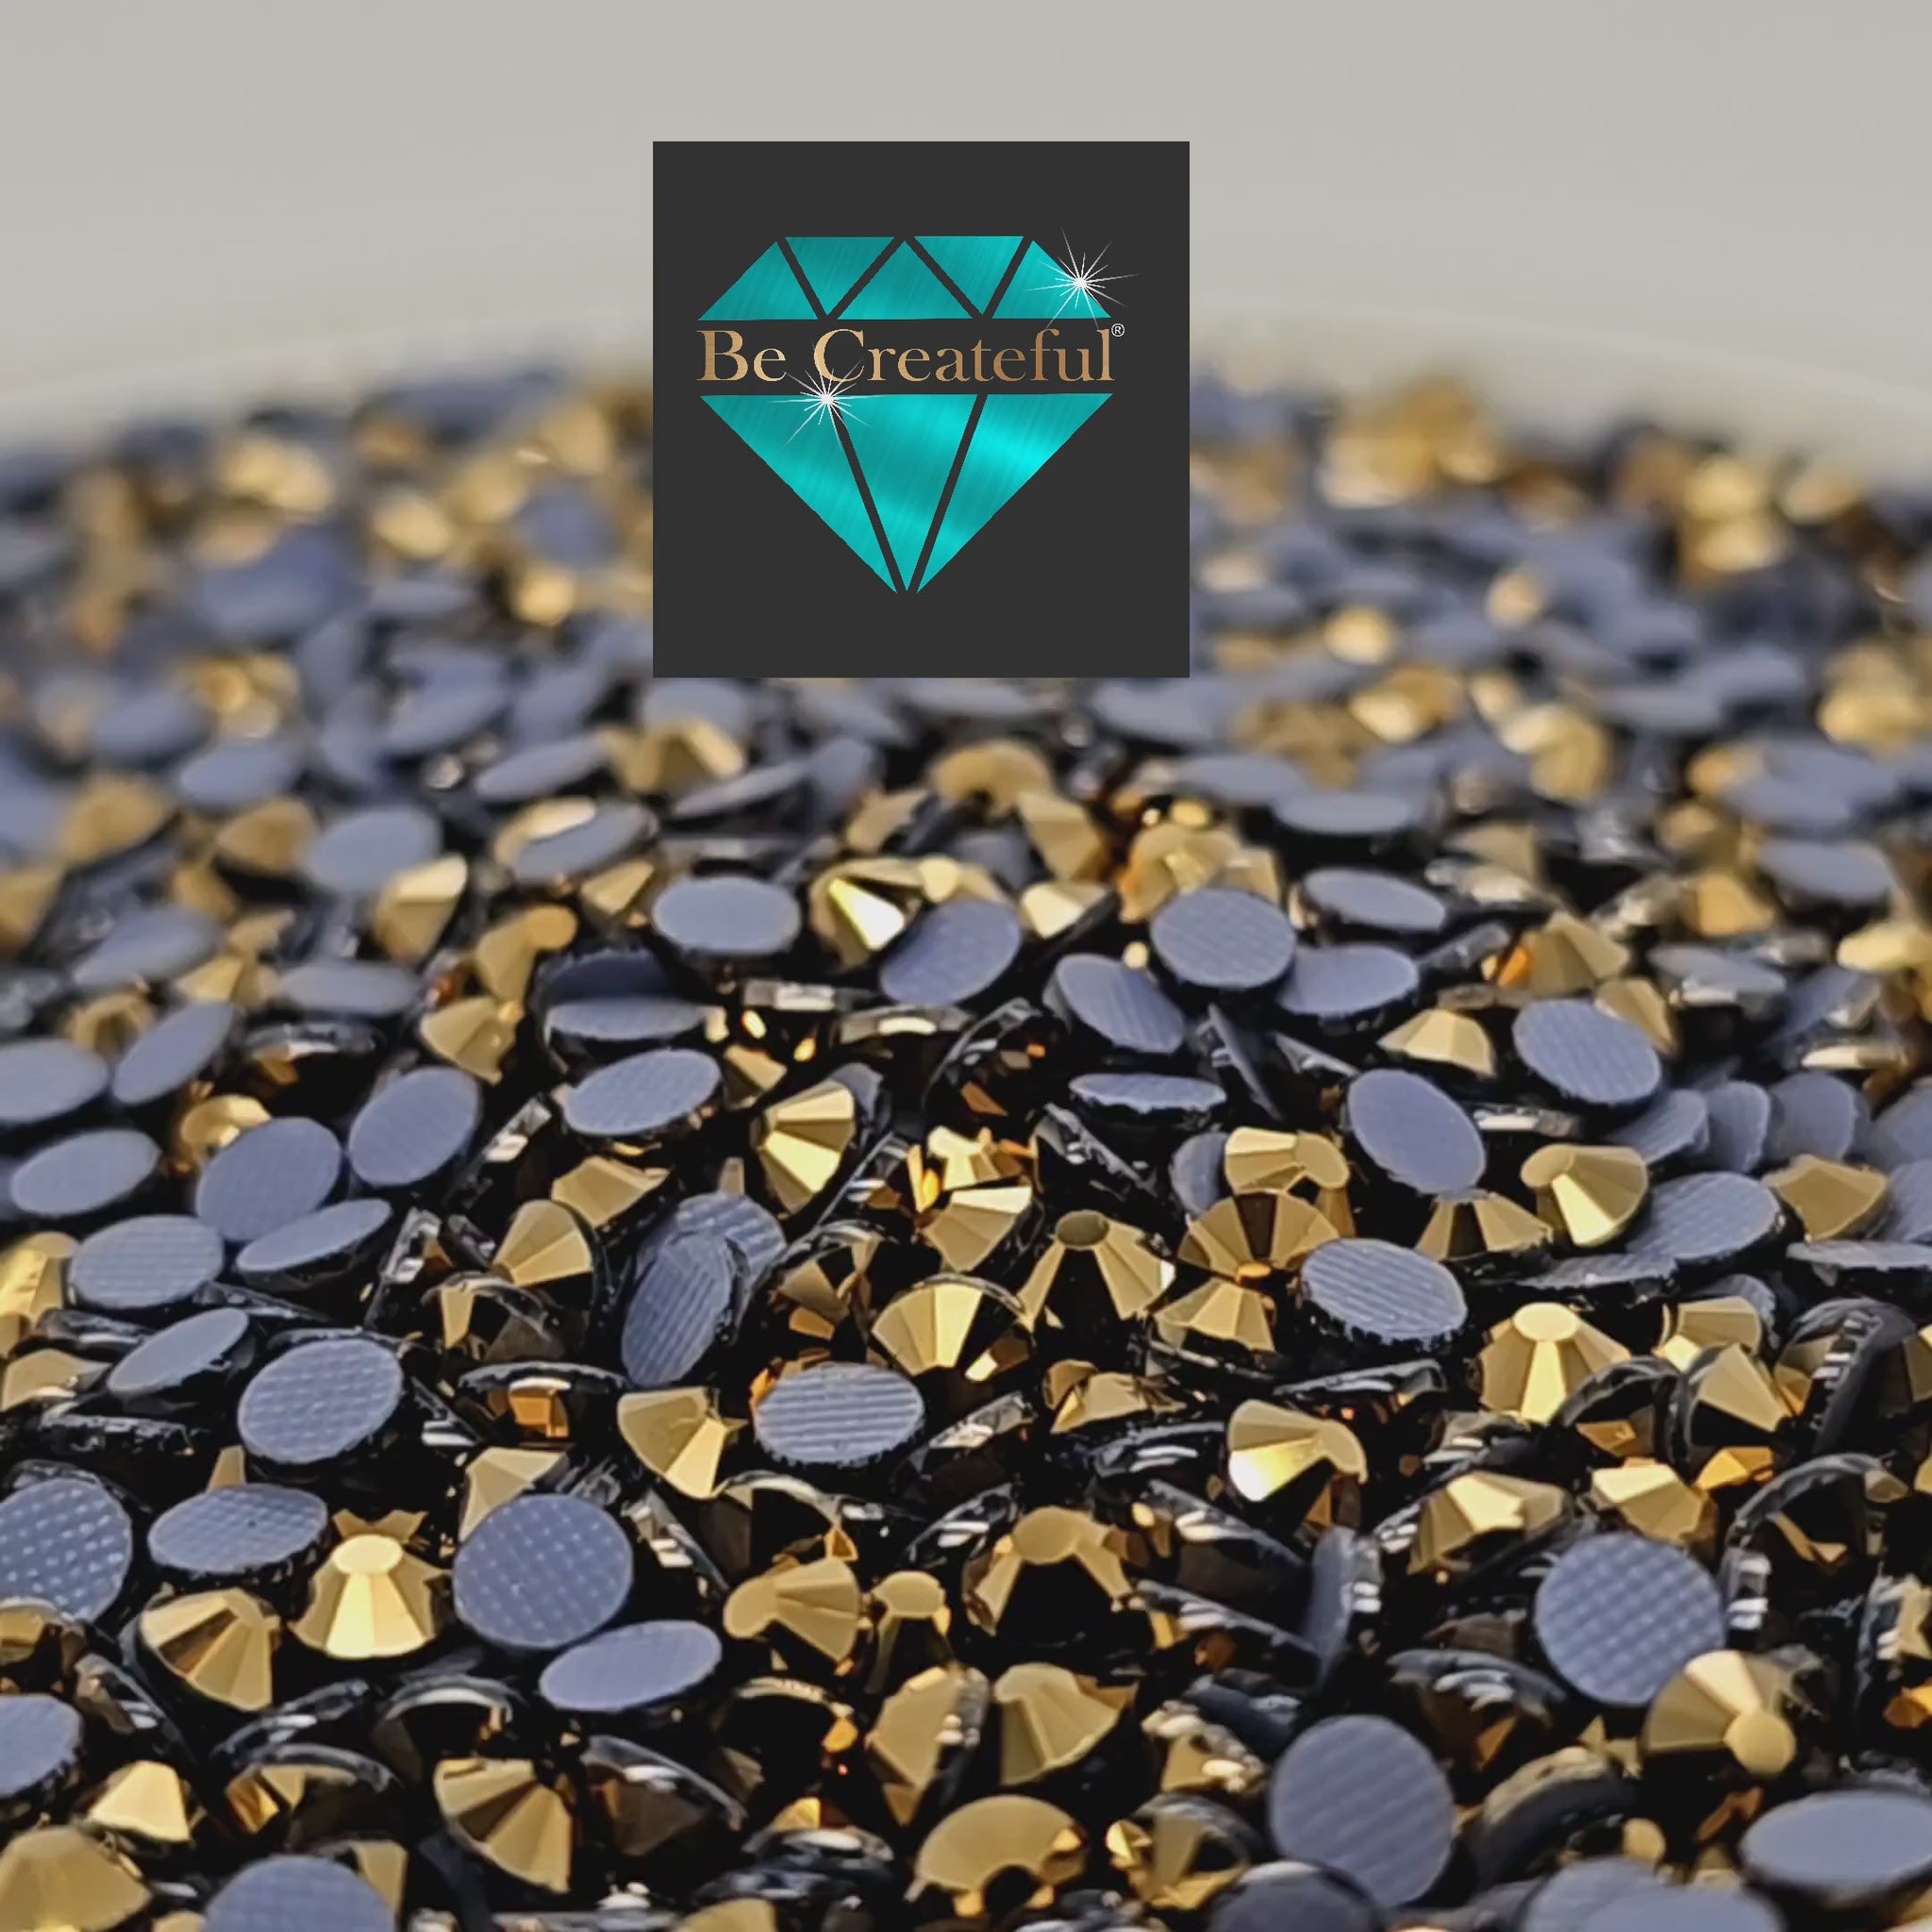 Be Createful LUXE® Aurum Gold Glass Hotfix Rhinestones are high-quality 14-16 facet glass Rhinestone that provides intense sparkle and refraction.